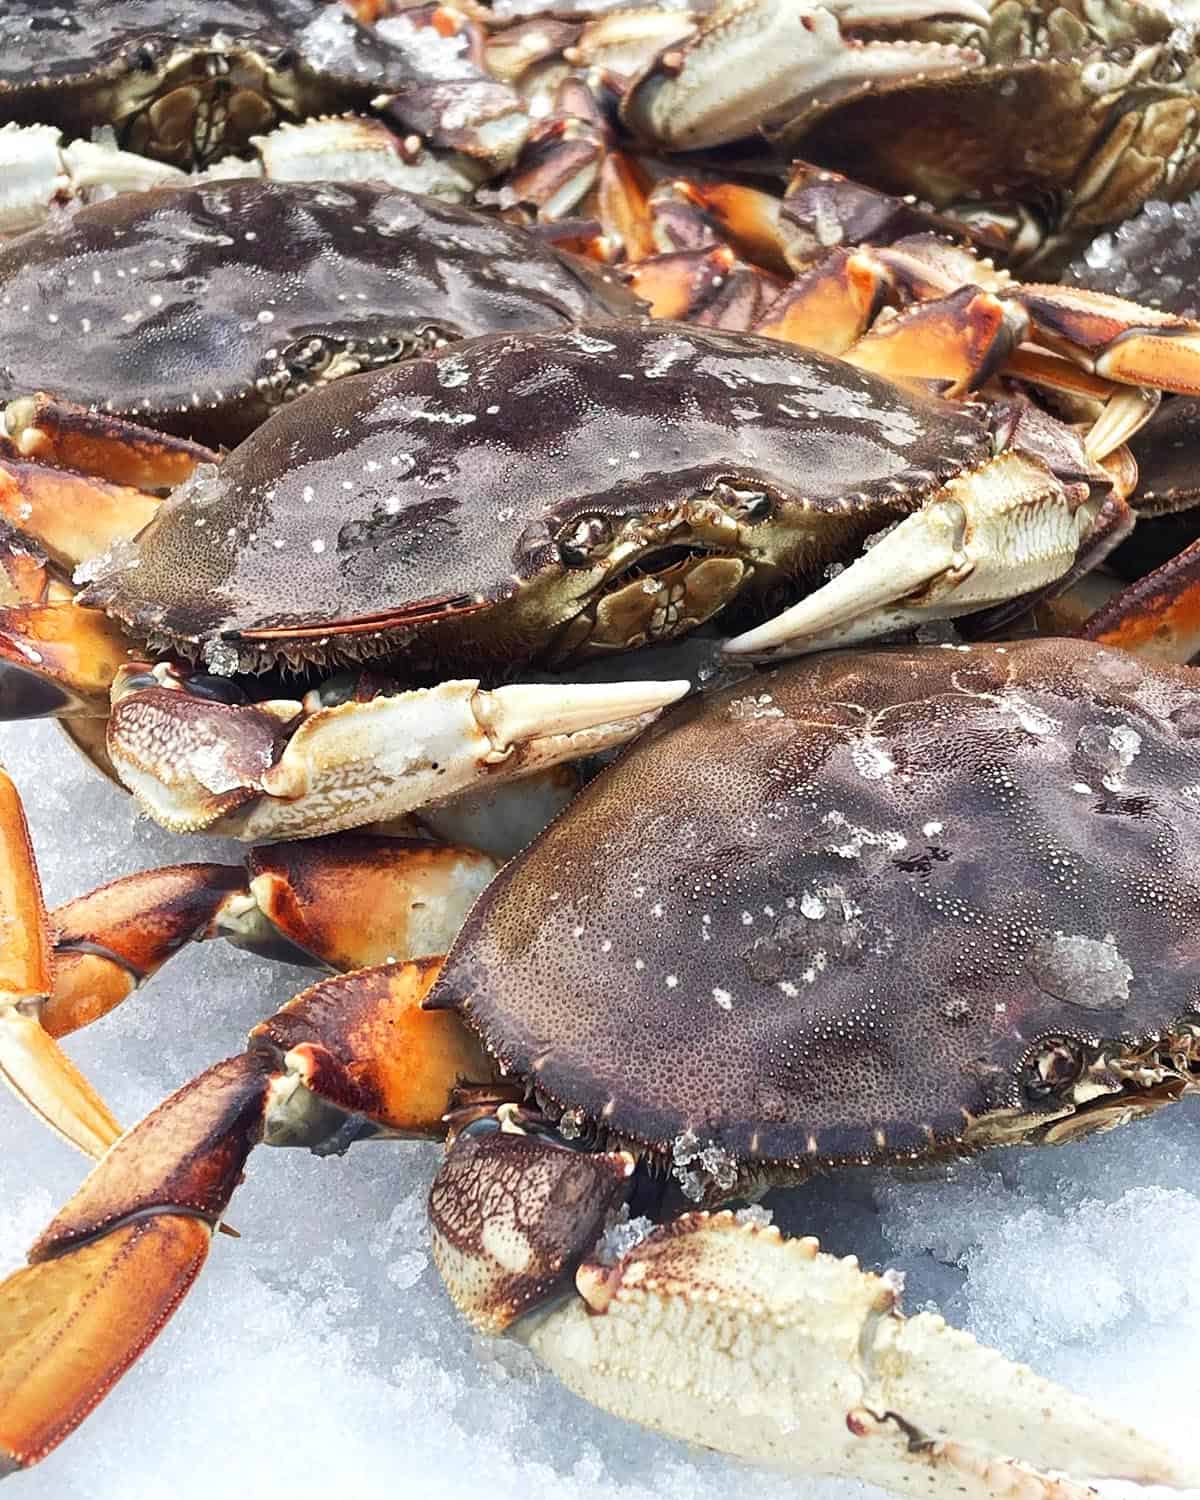 Freshly caught Dungeness crab from Washington State.